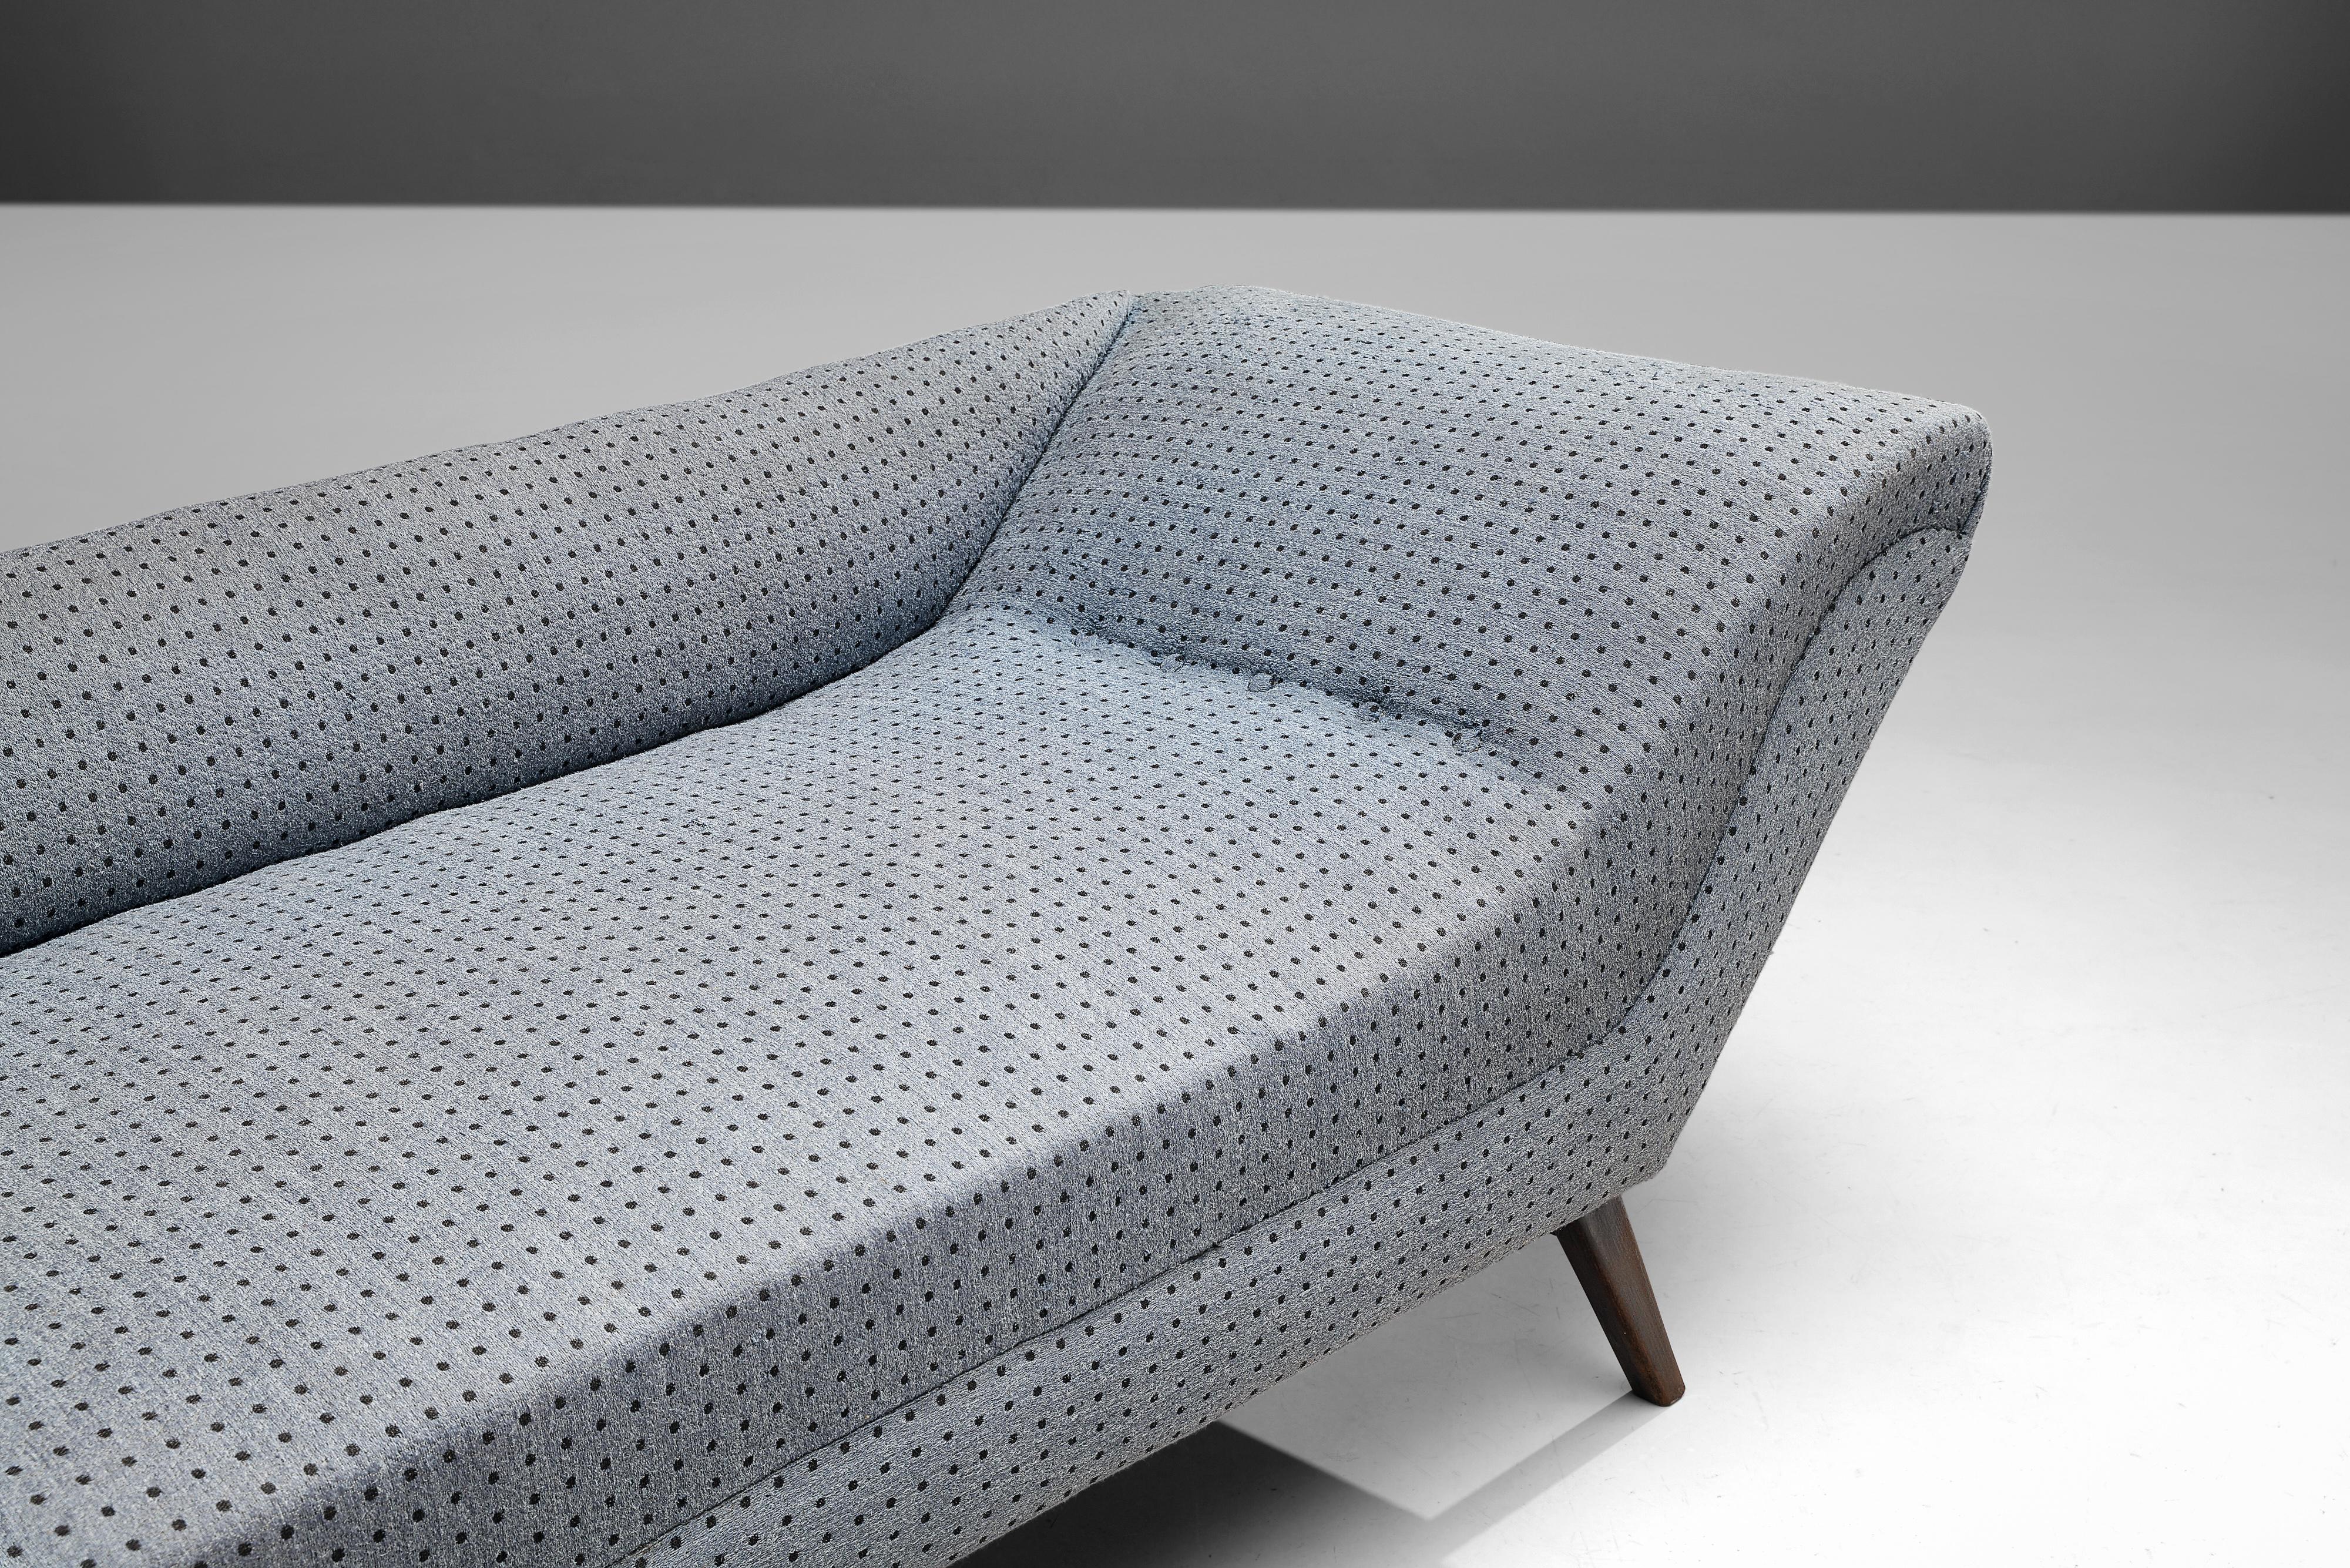 Scandinavian Modern Danish Chaise Longue in Ice Blue Dotted Upholstery